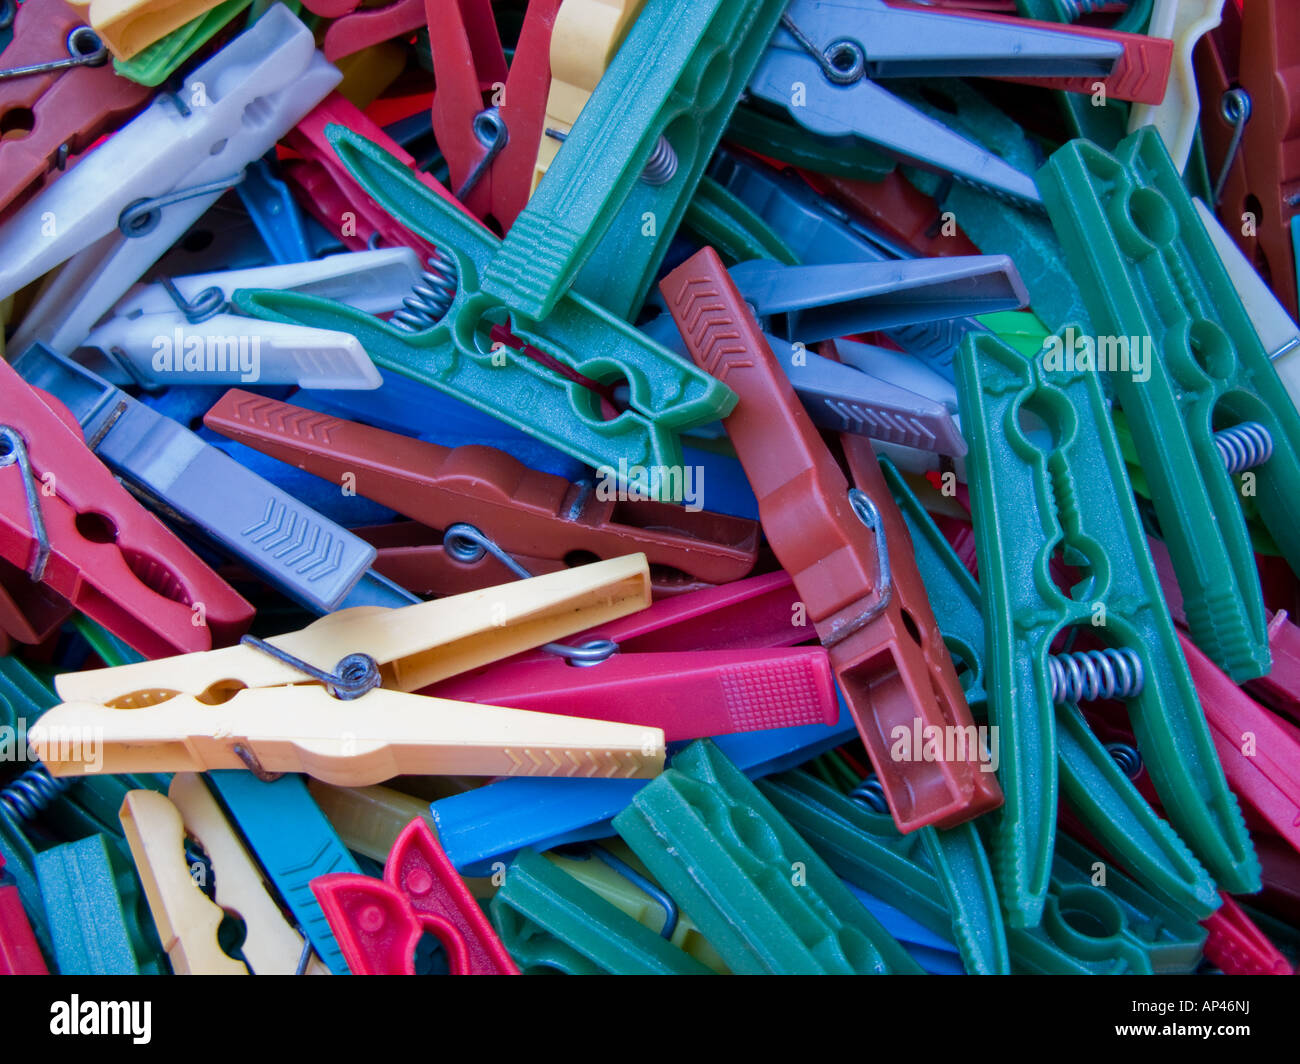 Pile of old, used multicoloured clothes pegs Stock Photo